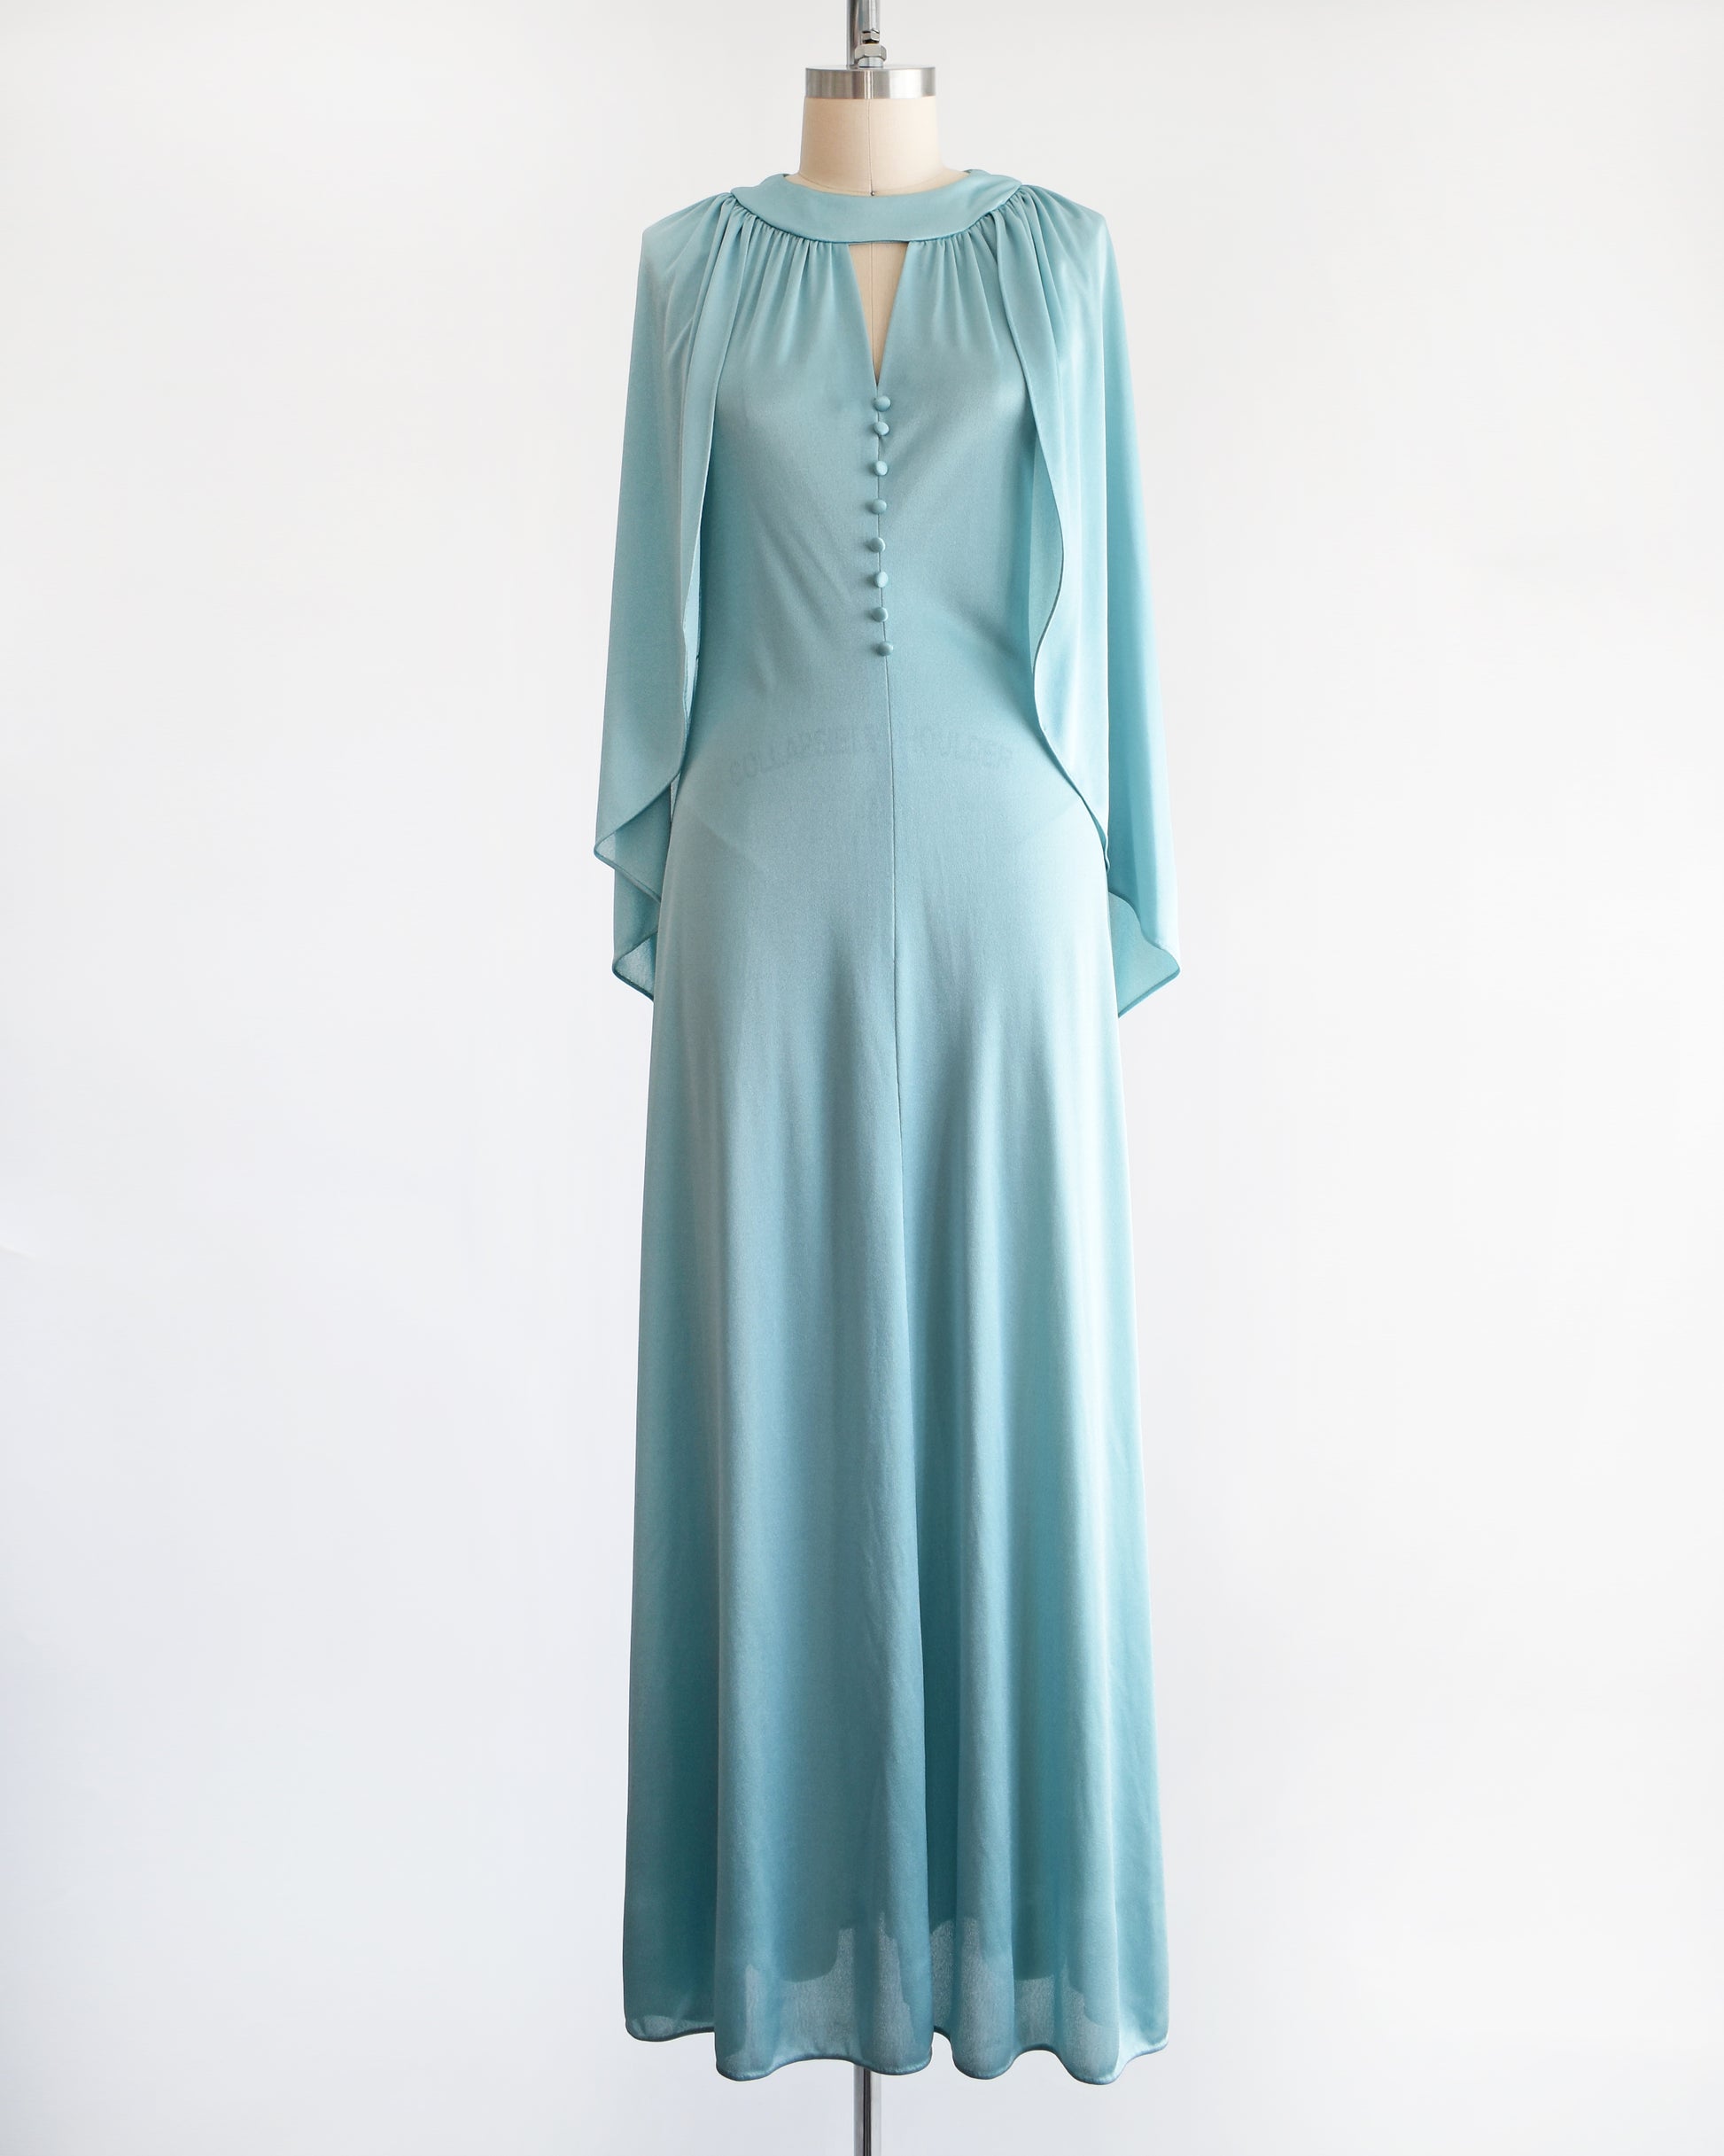 A vintage 1970s seafoam blue caped maxi dress that has a triangle keyhole cutout and decorative buttons down the front